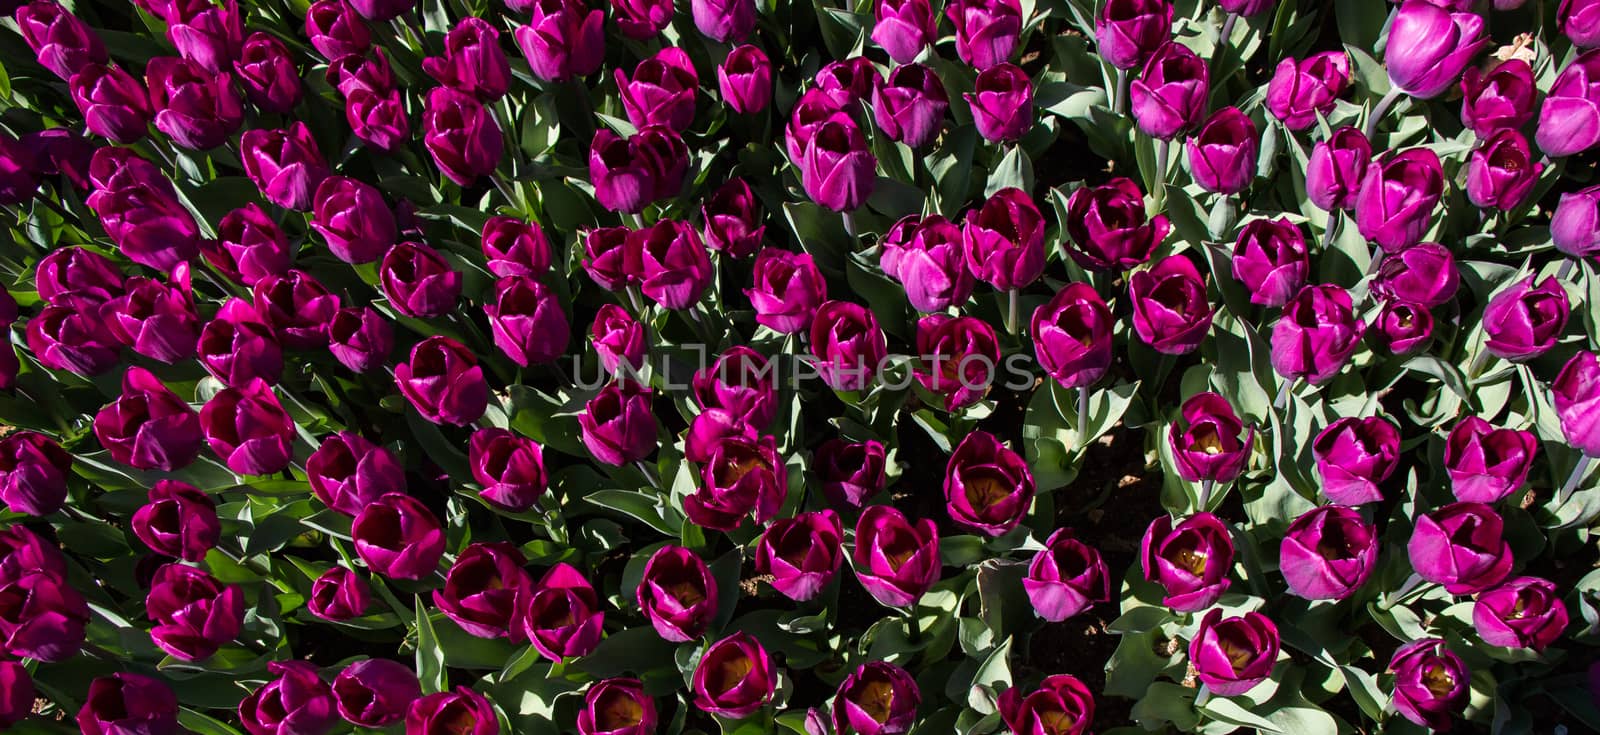  Colorful tulip flowers as a background in the garden by berkay